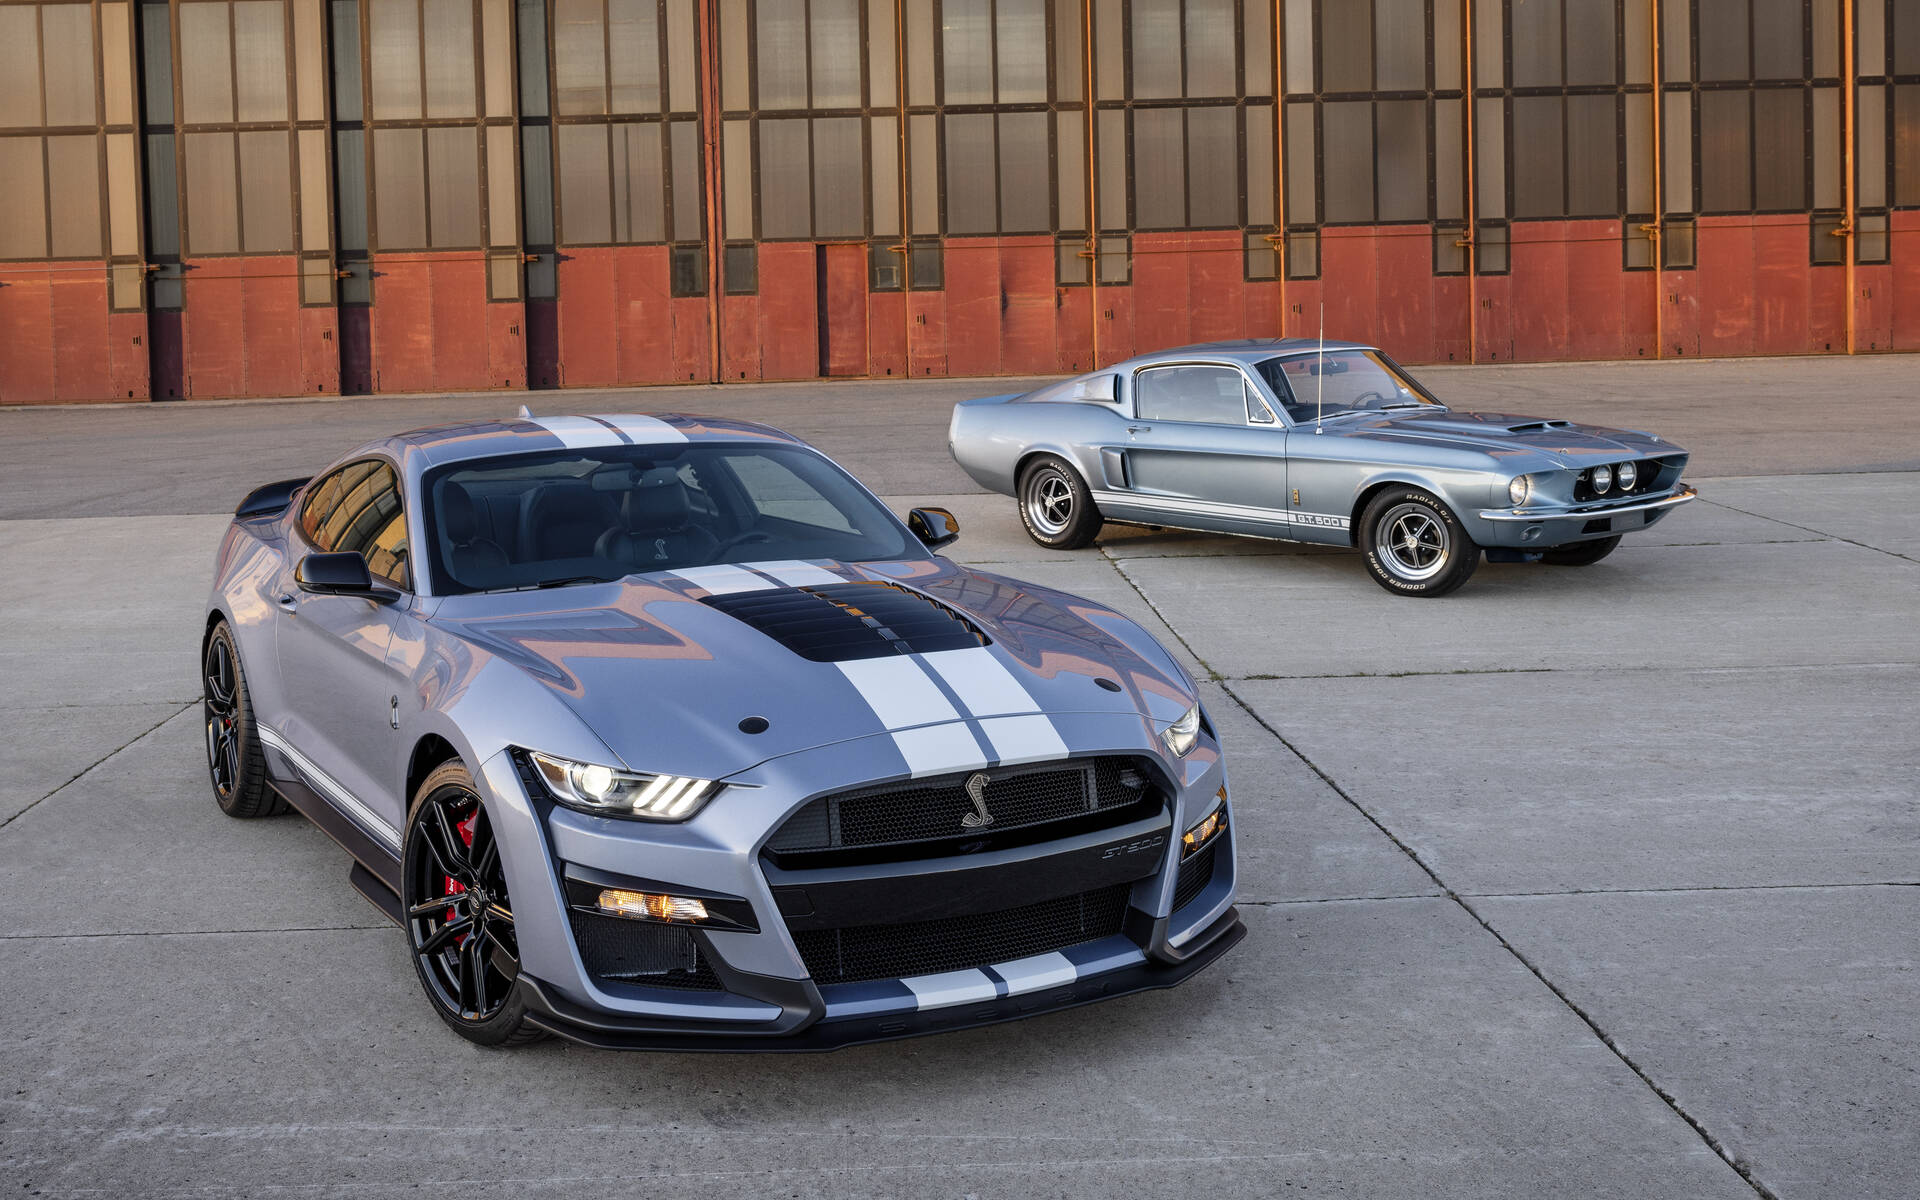 https://www.performance-motors.fr/wp-content/uploads/2022/01/495413-ford-mustang-shelby-gt500-une-edition-heritage-pour-les-55-ans.jpg